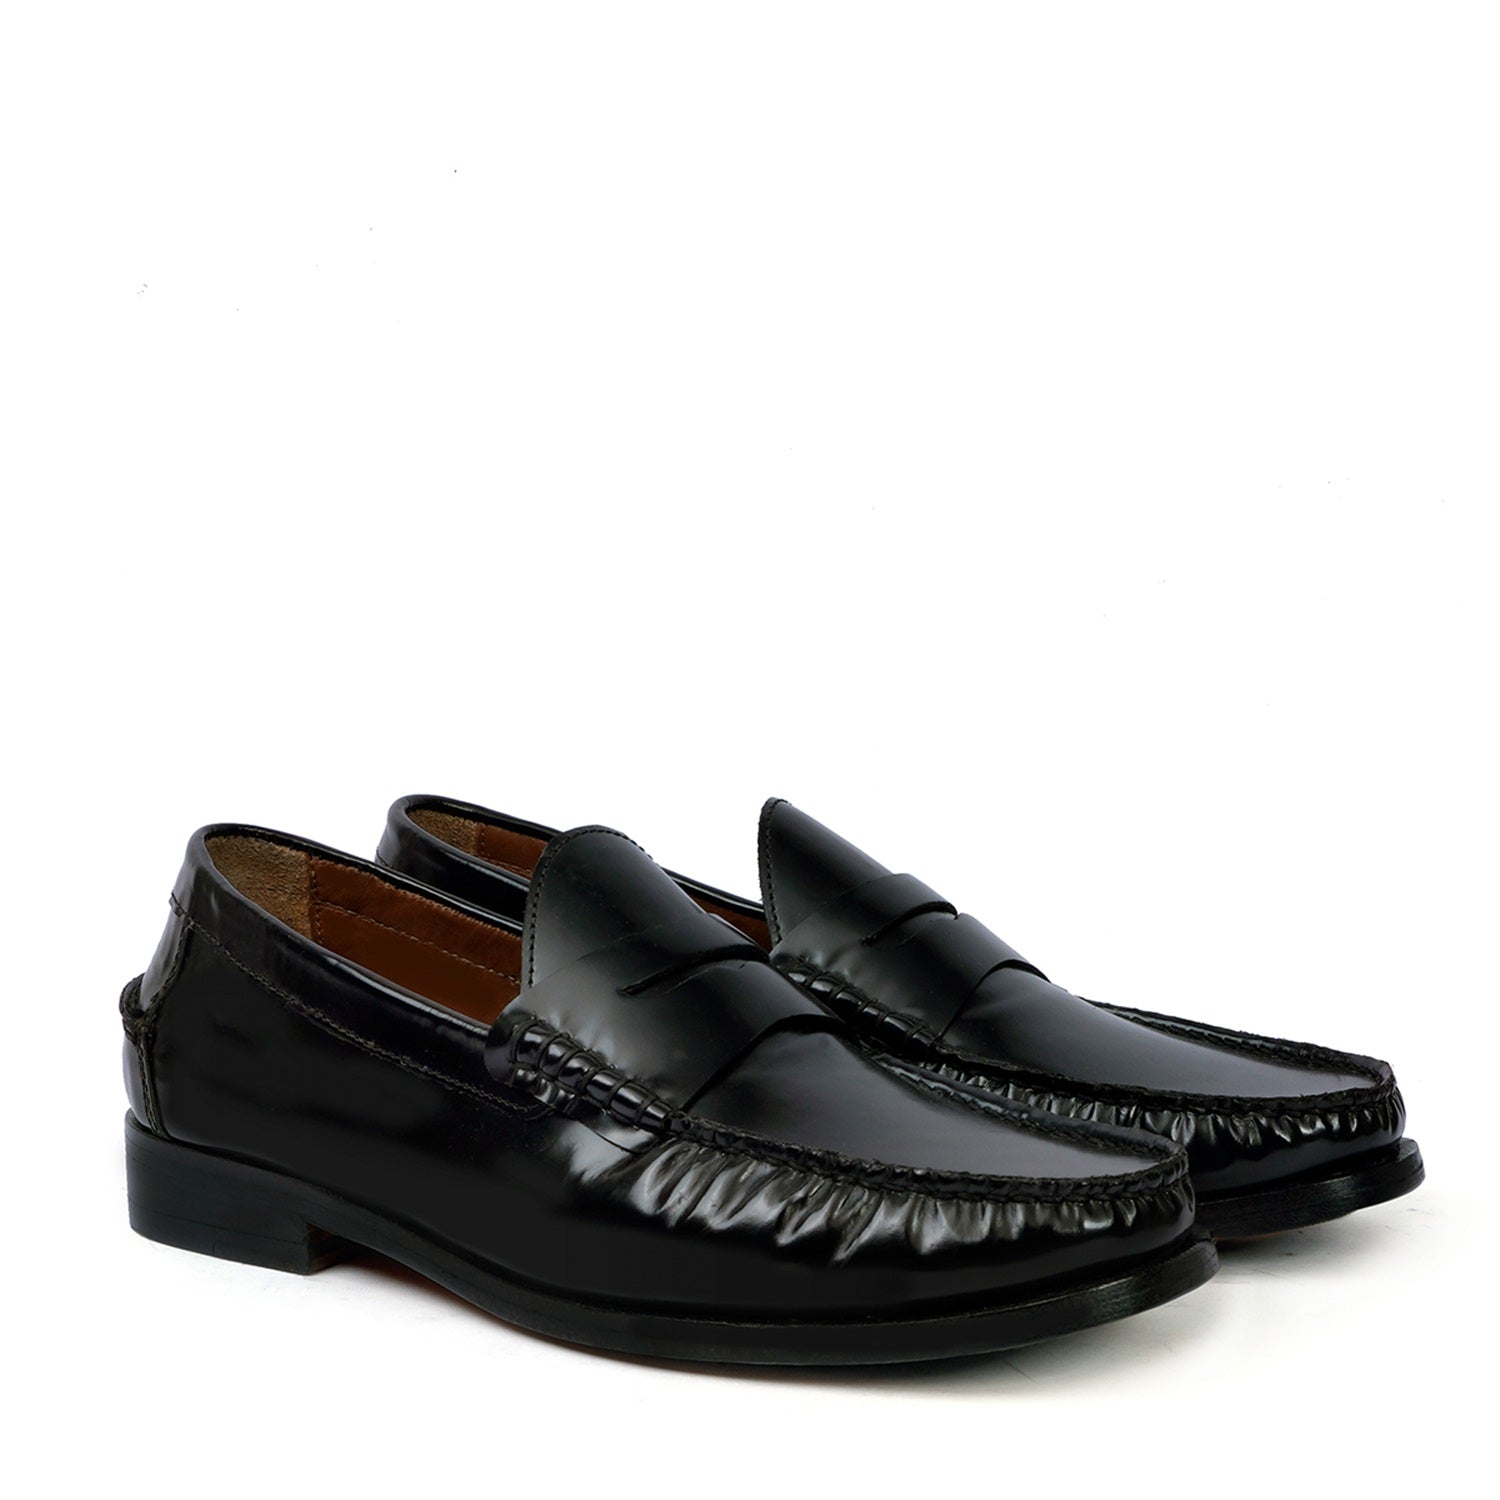 Stitched Loafer in Genuine Black Leather